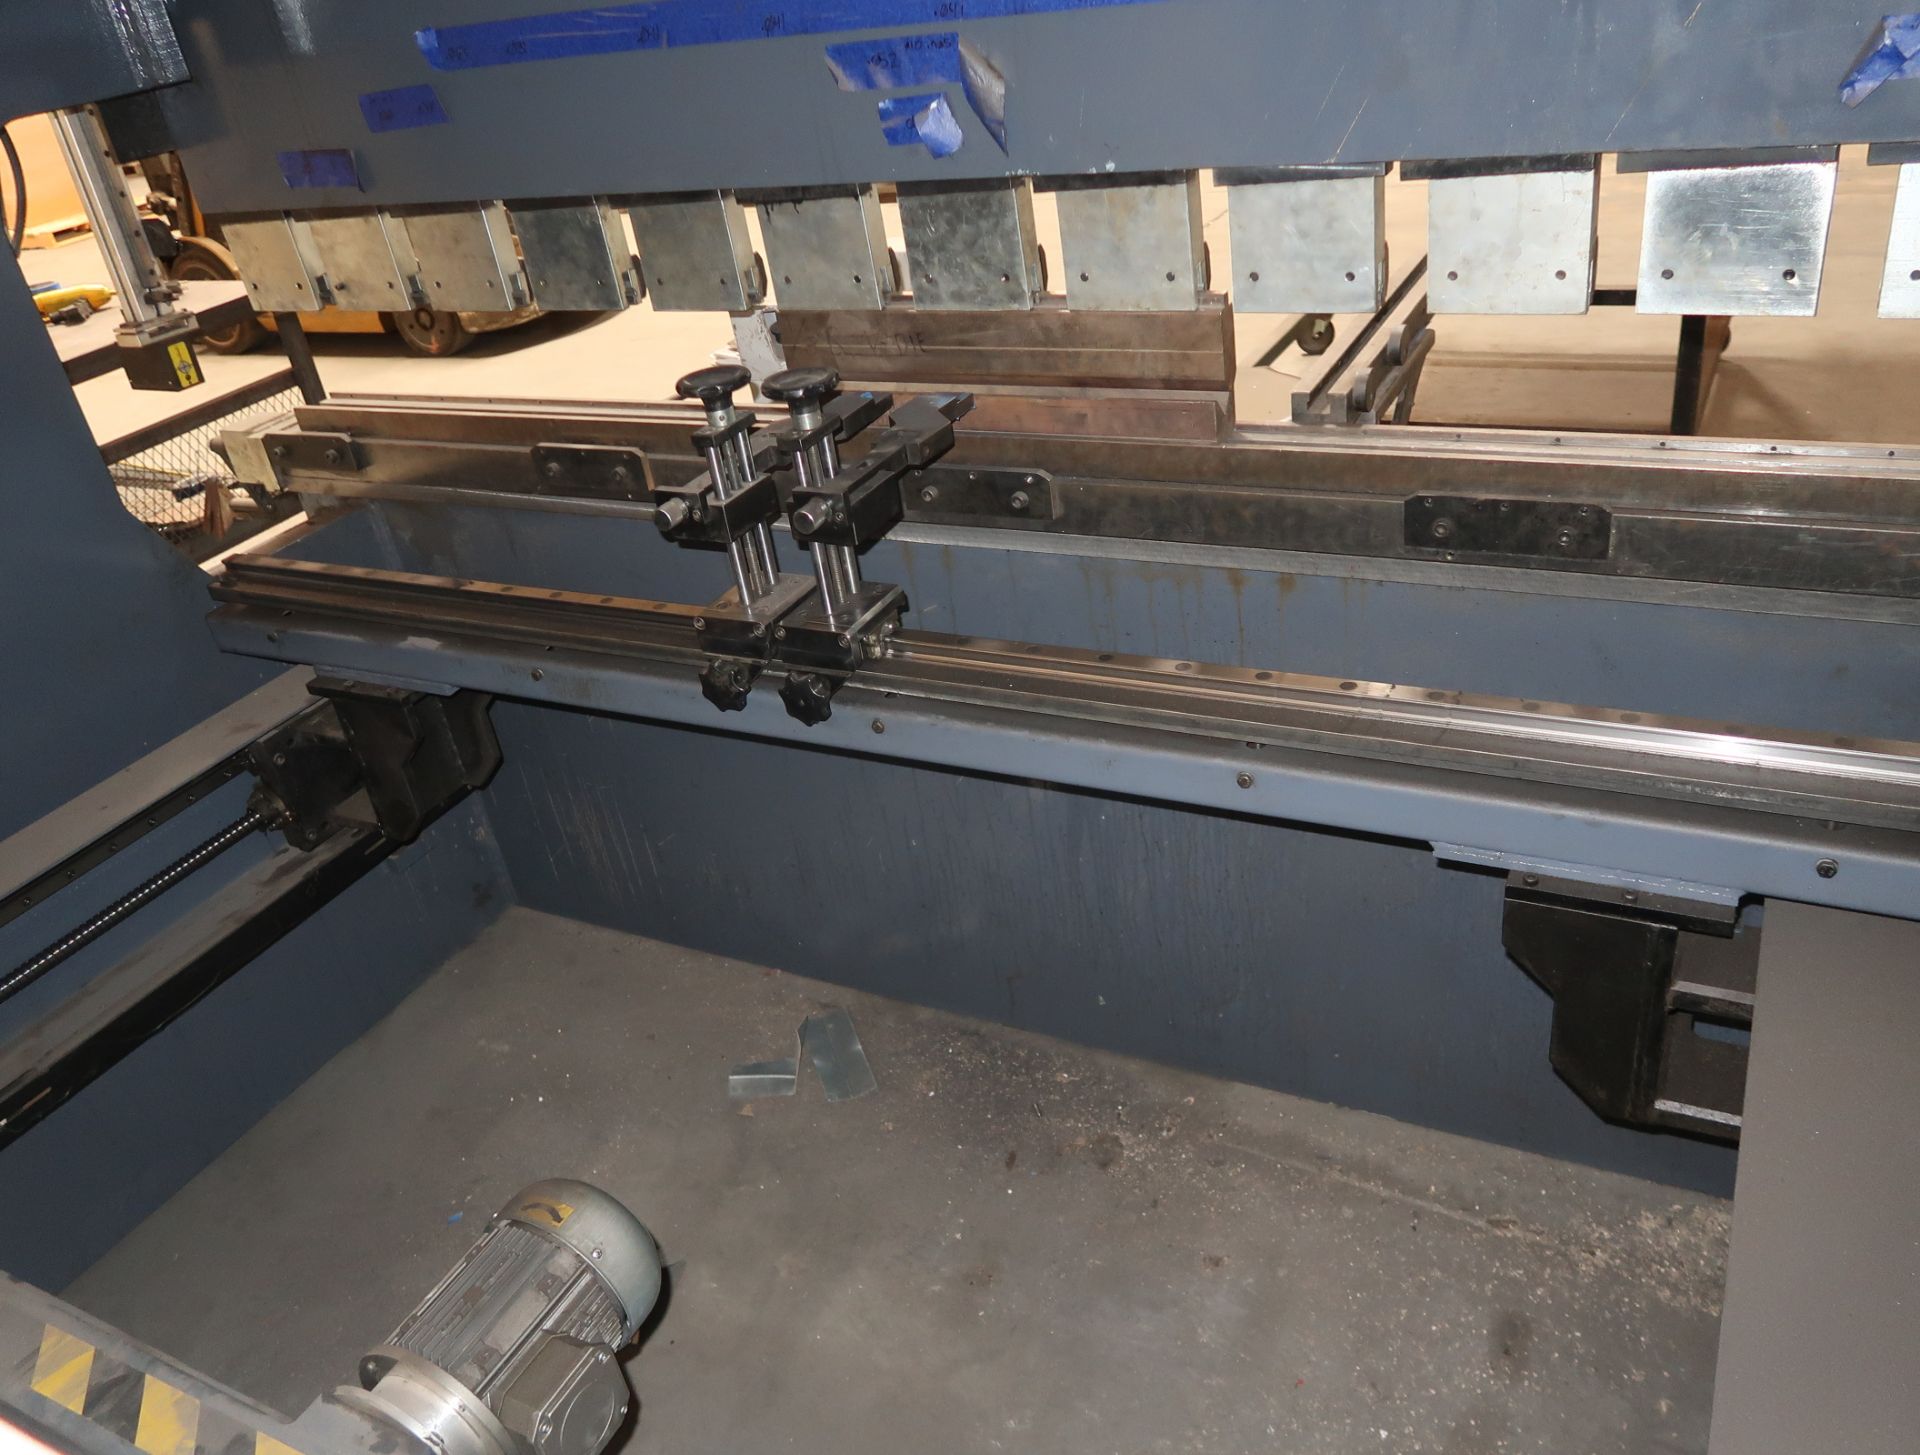 2014 JMT MDL. 100" X 110 US TON CNC PRESS BRAKE, MDL. JM-R8110, SN 7312149148, 230/460V 3PH - Image 7 of 8